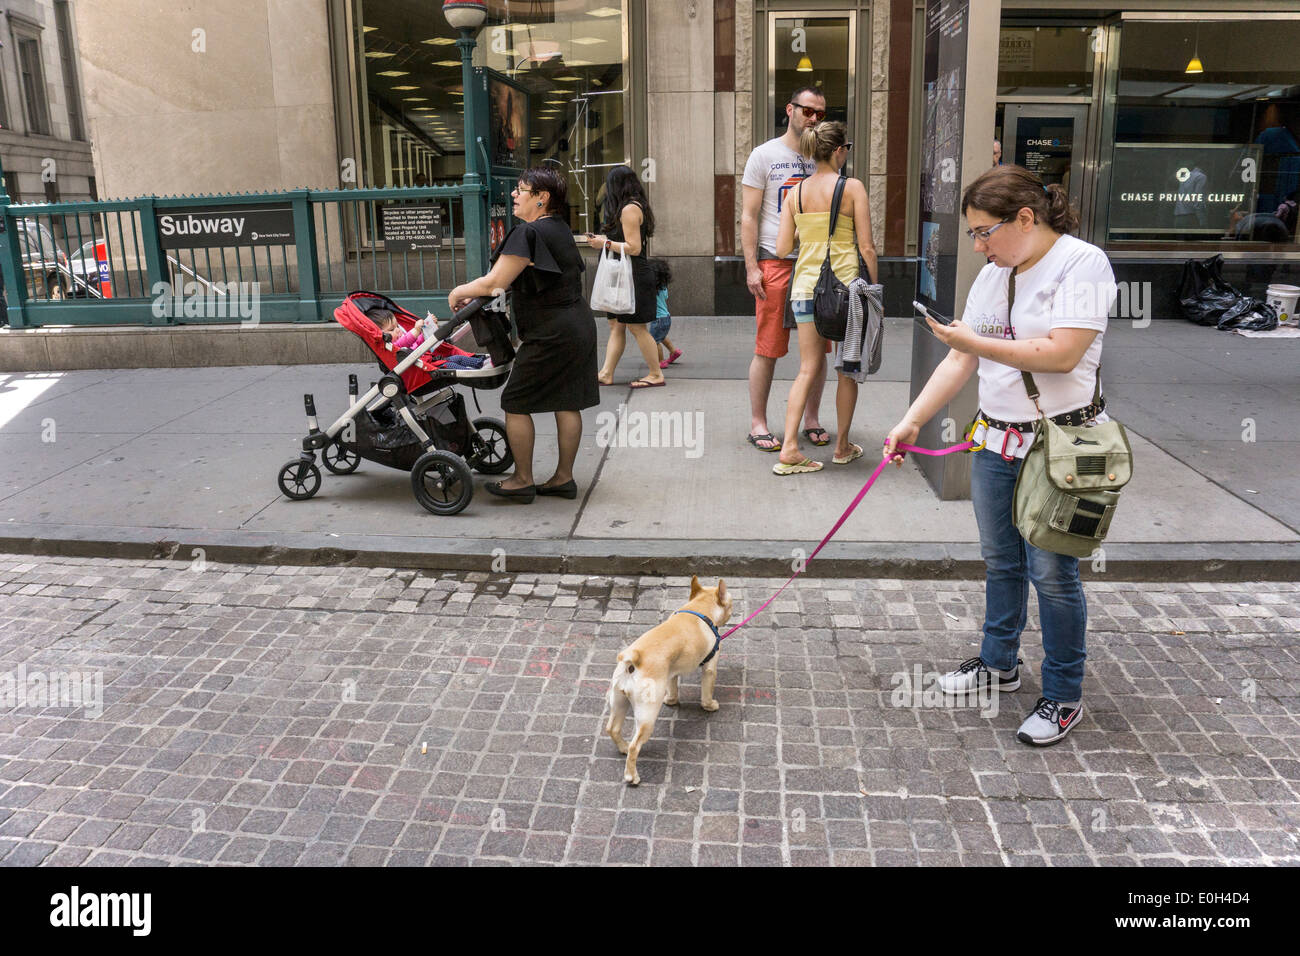 girl walking dog on Wall street in lower Manhattan where diverse passers by include tourist couple & woman pushing baby stroller Stock Photo